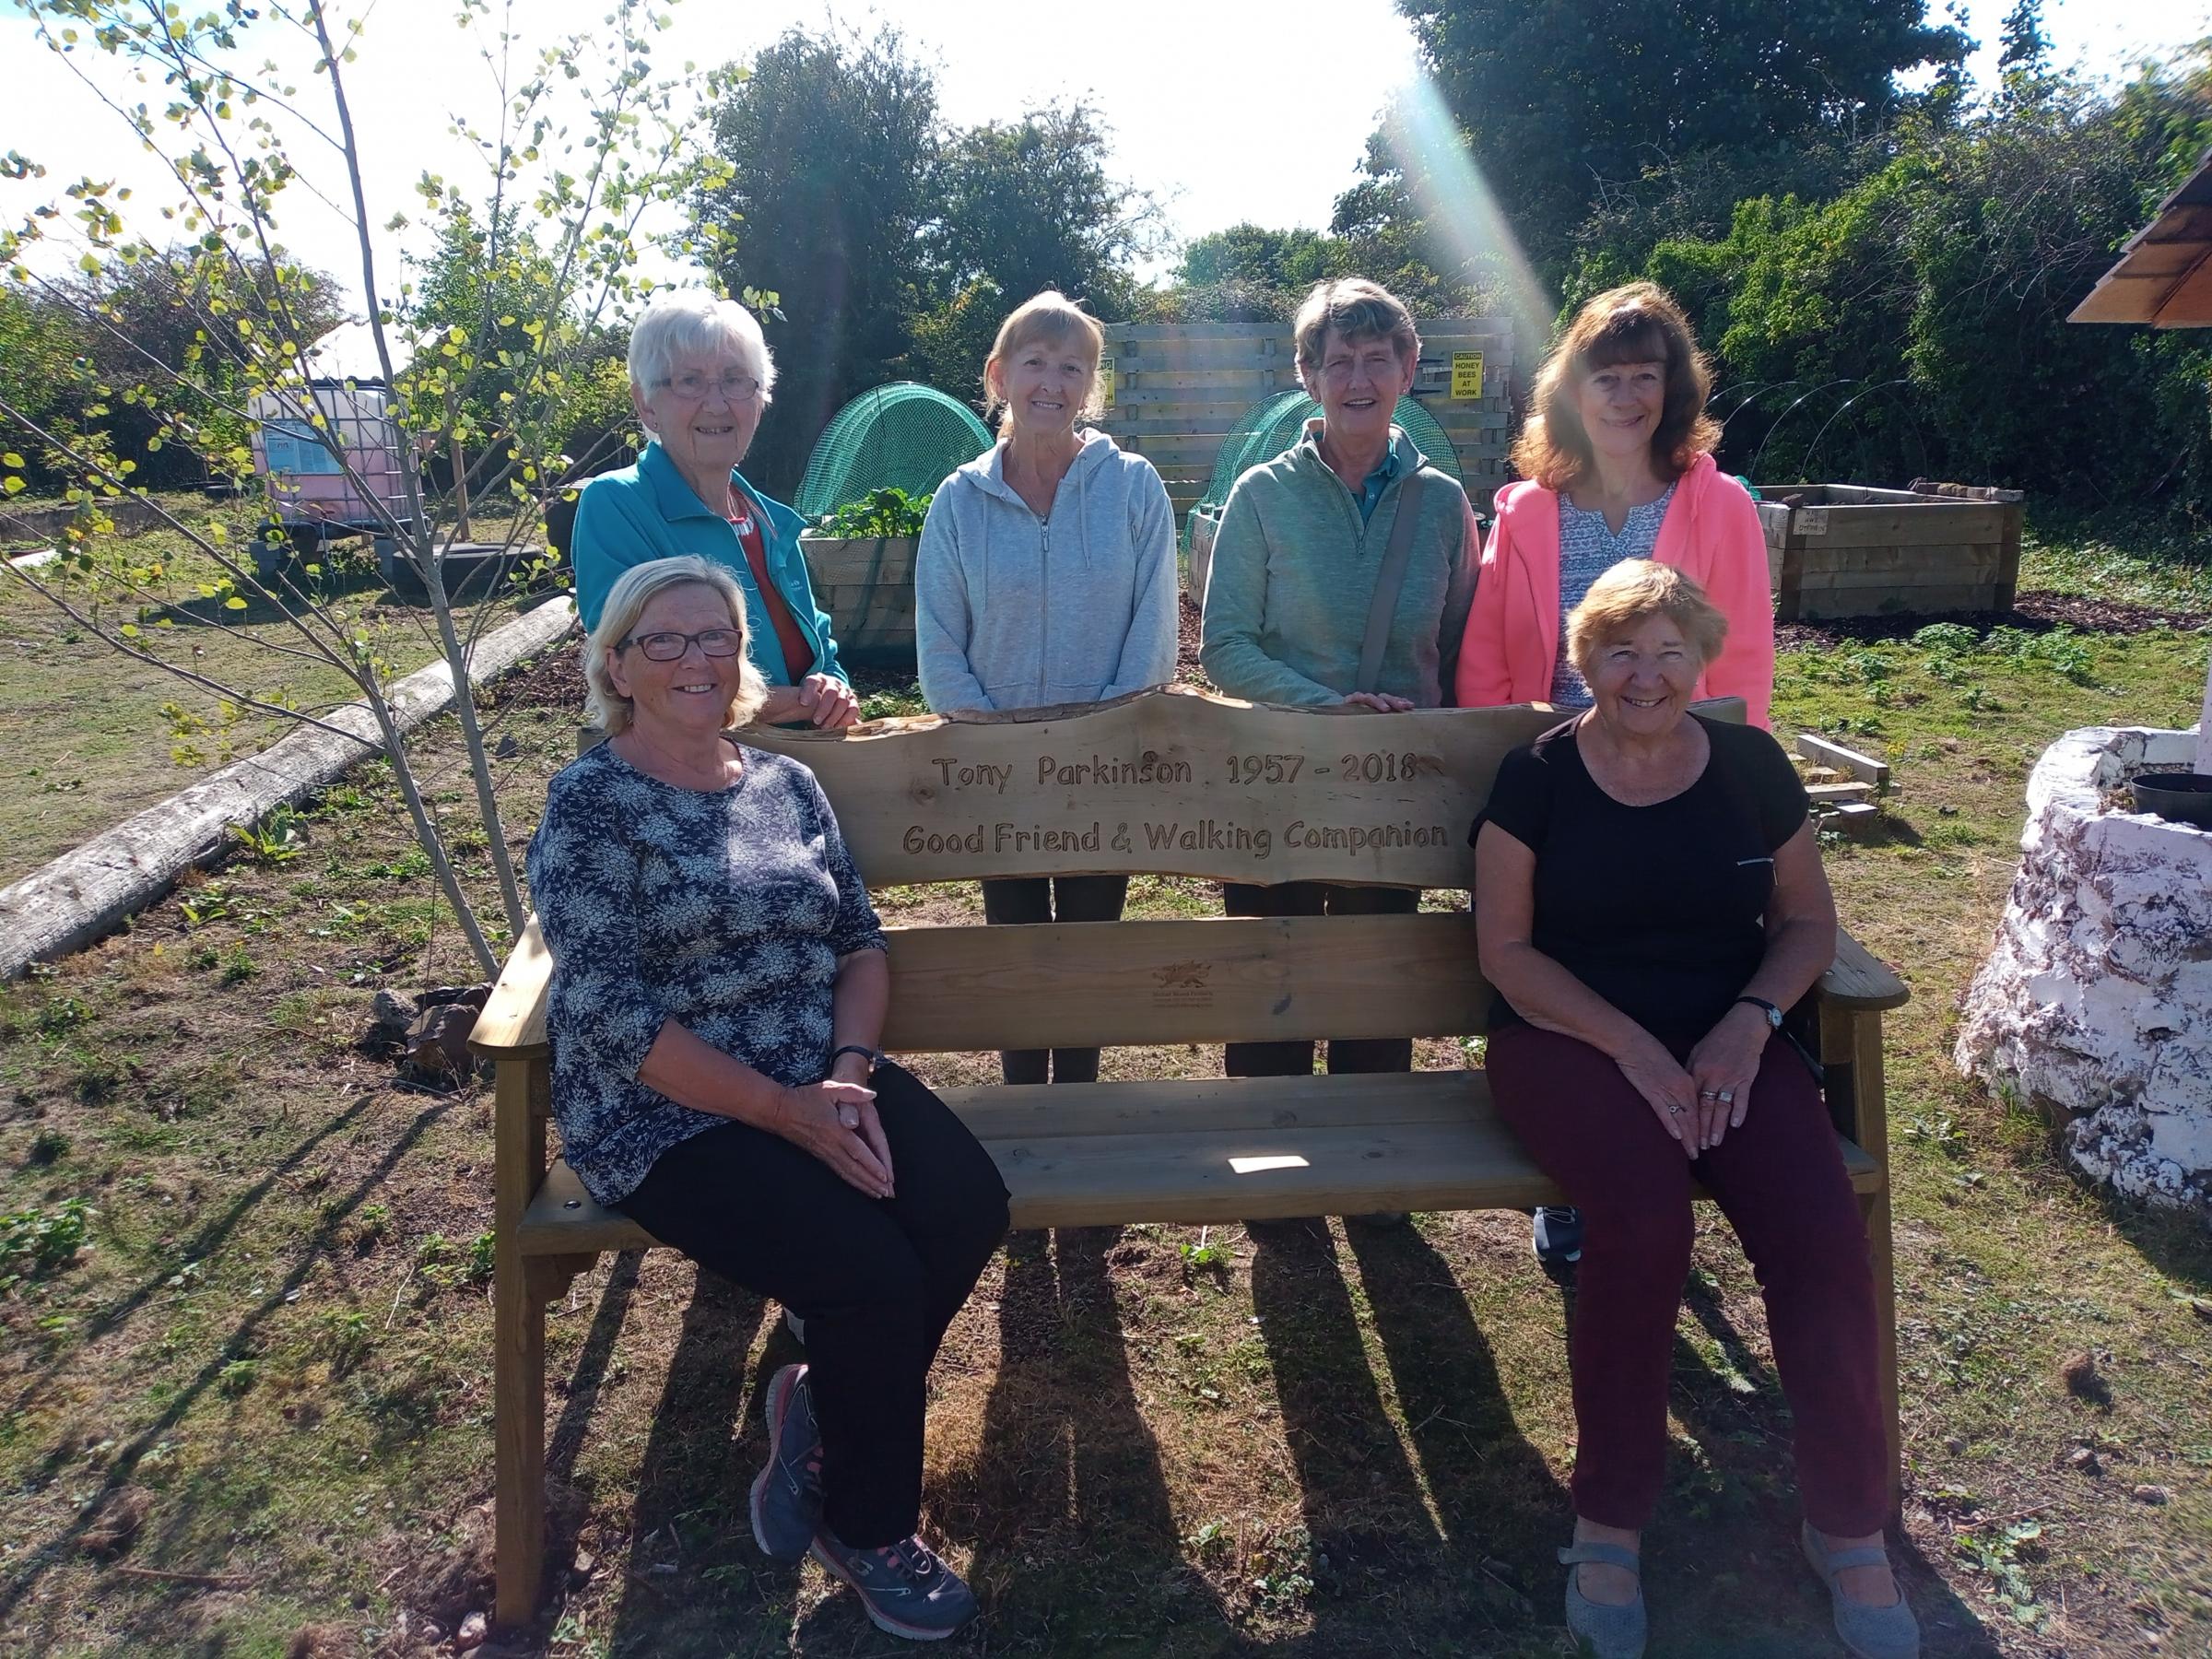 Sister Pearl Pilkington and members of Walkabout Flintshire with the memorial bench at Bagillt Community Garden, in memory of Tony Parkinson.